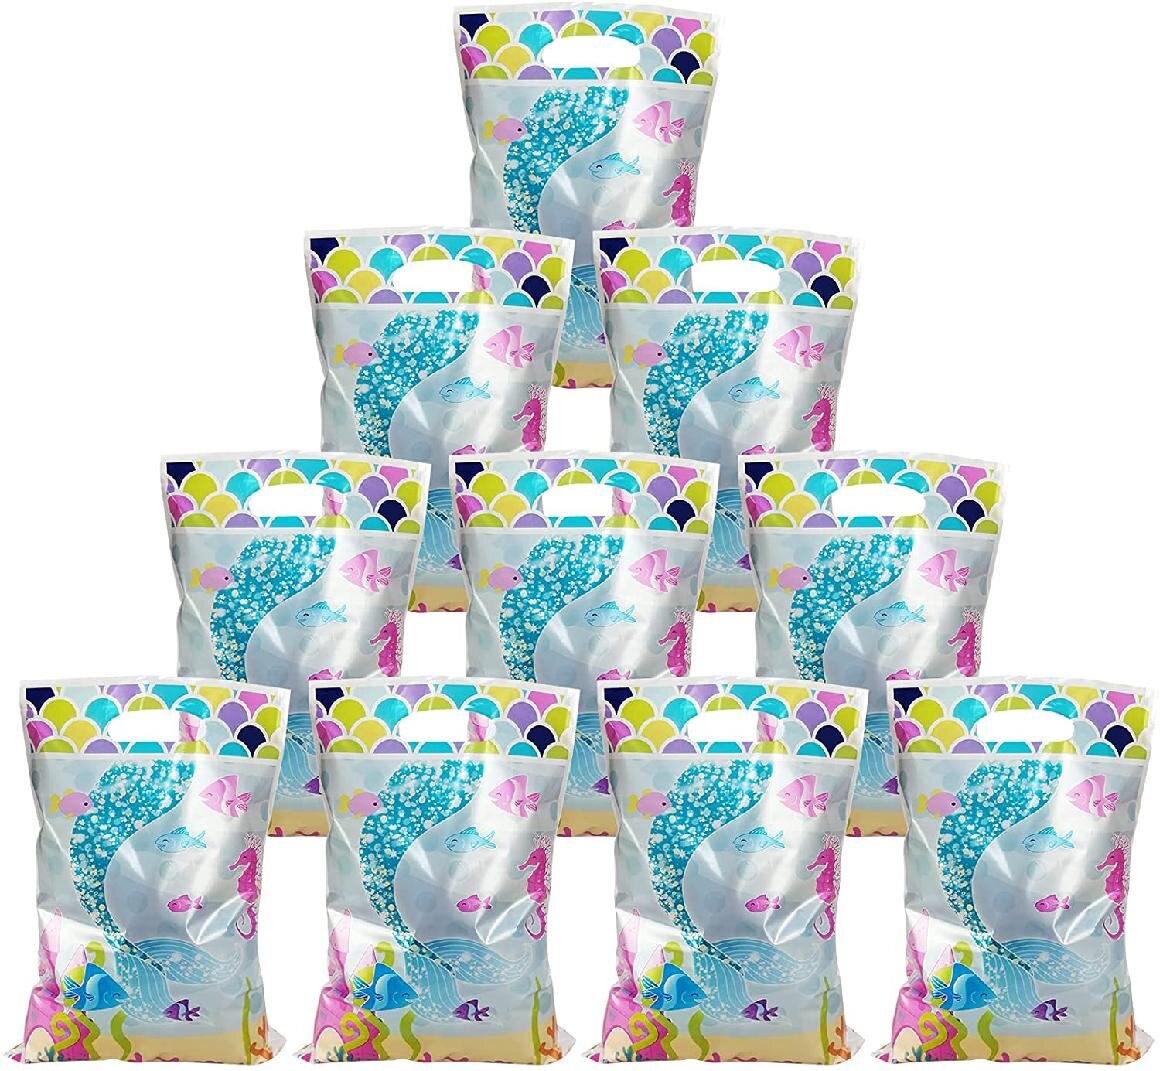 3D Mermaid Pattern Glitter Treat Mermaid Paper Bags for Under The Sea Party Mermaid Gifts Bags,Party Supplies Favors Goodie Bag Pack of 14, Blue 